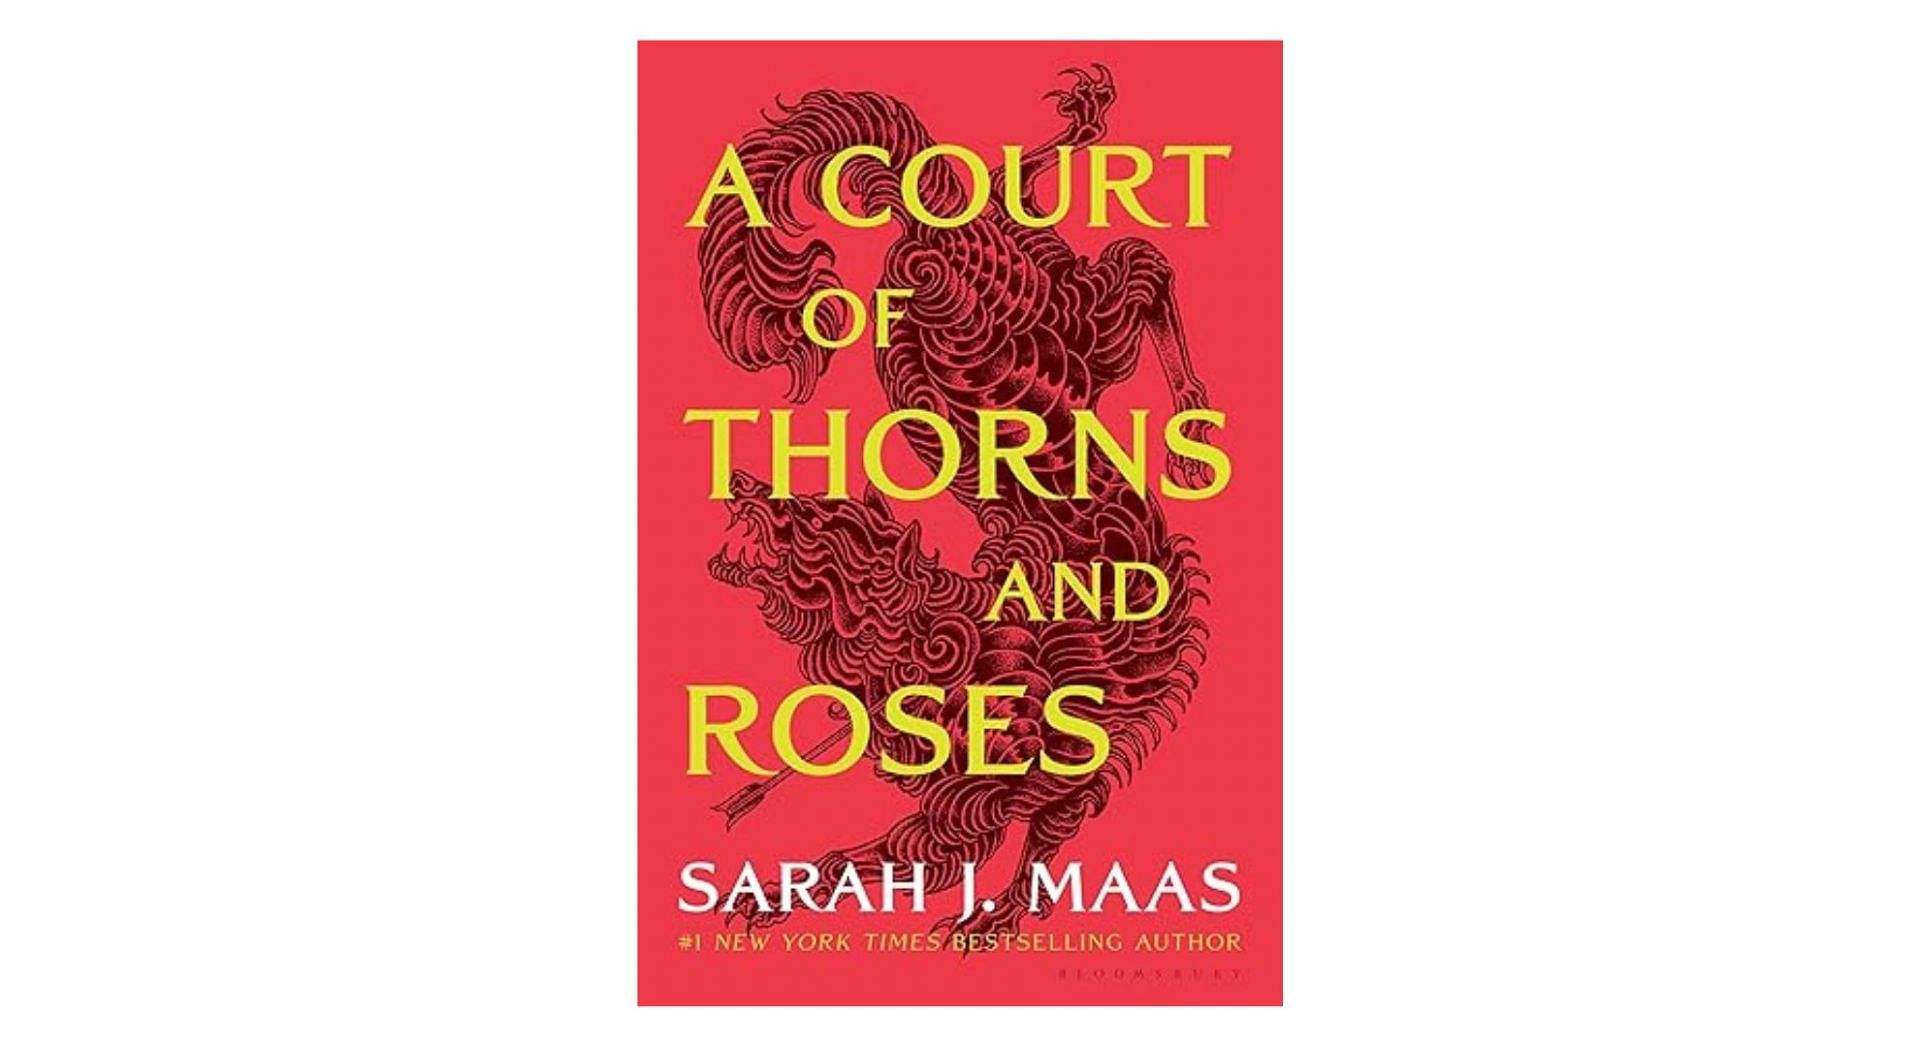 A Court of Thorns and Roses by Sarah J. Maas (Image via Amazon)